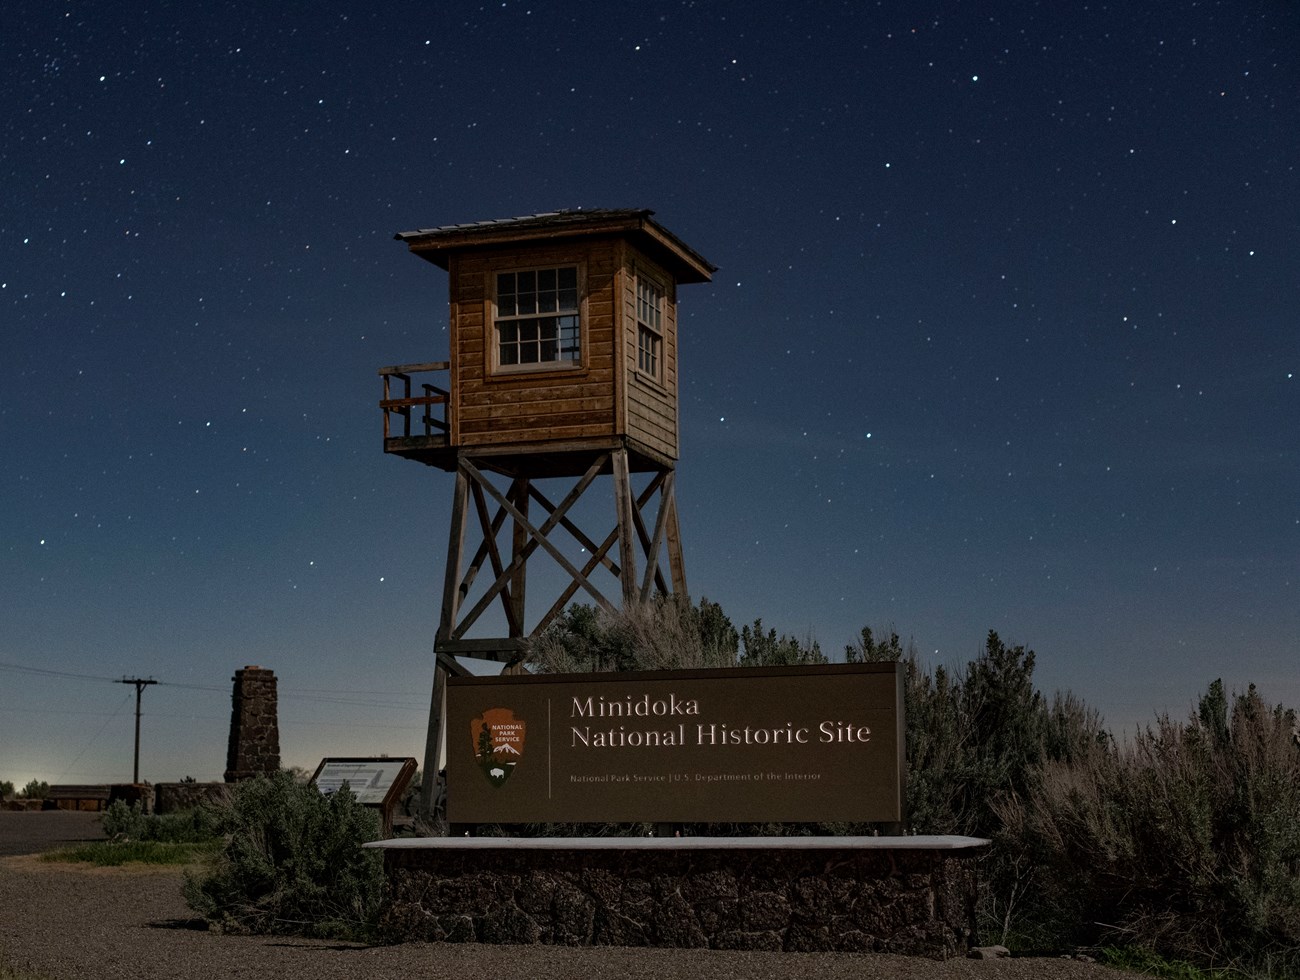 Guard tower and sign for Minidoka National Historic Site at night